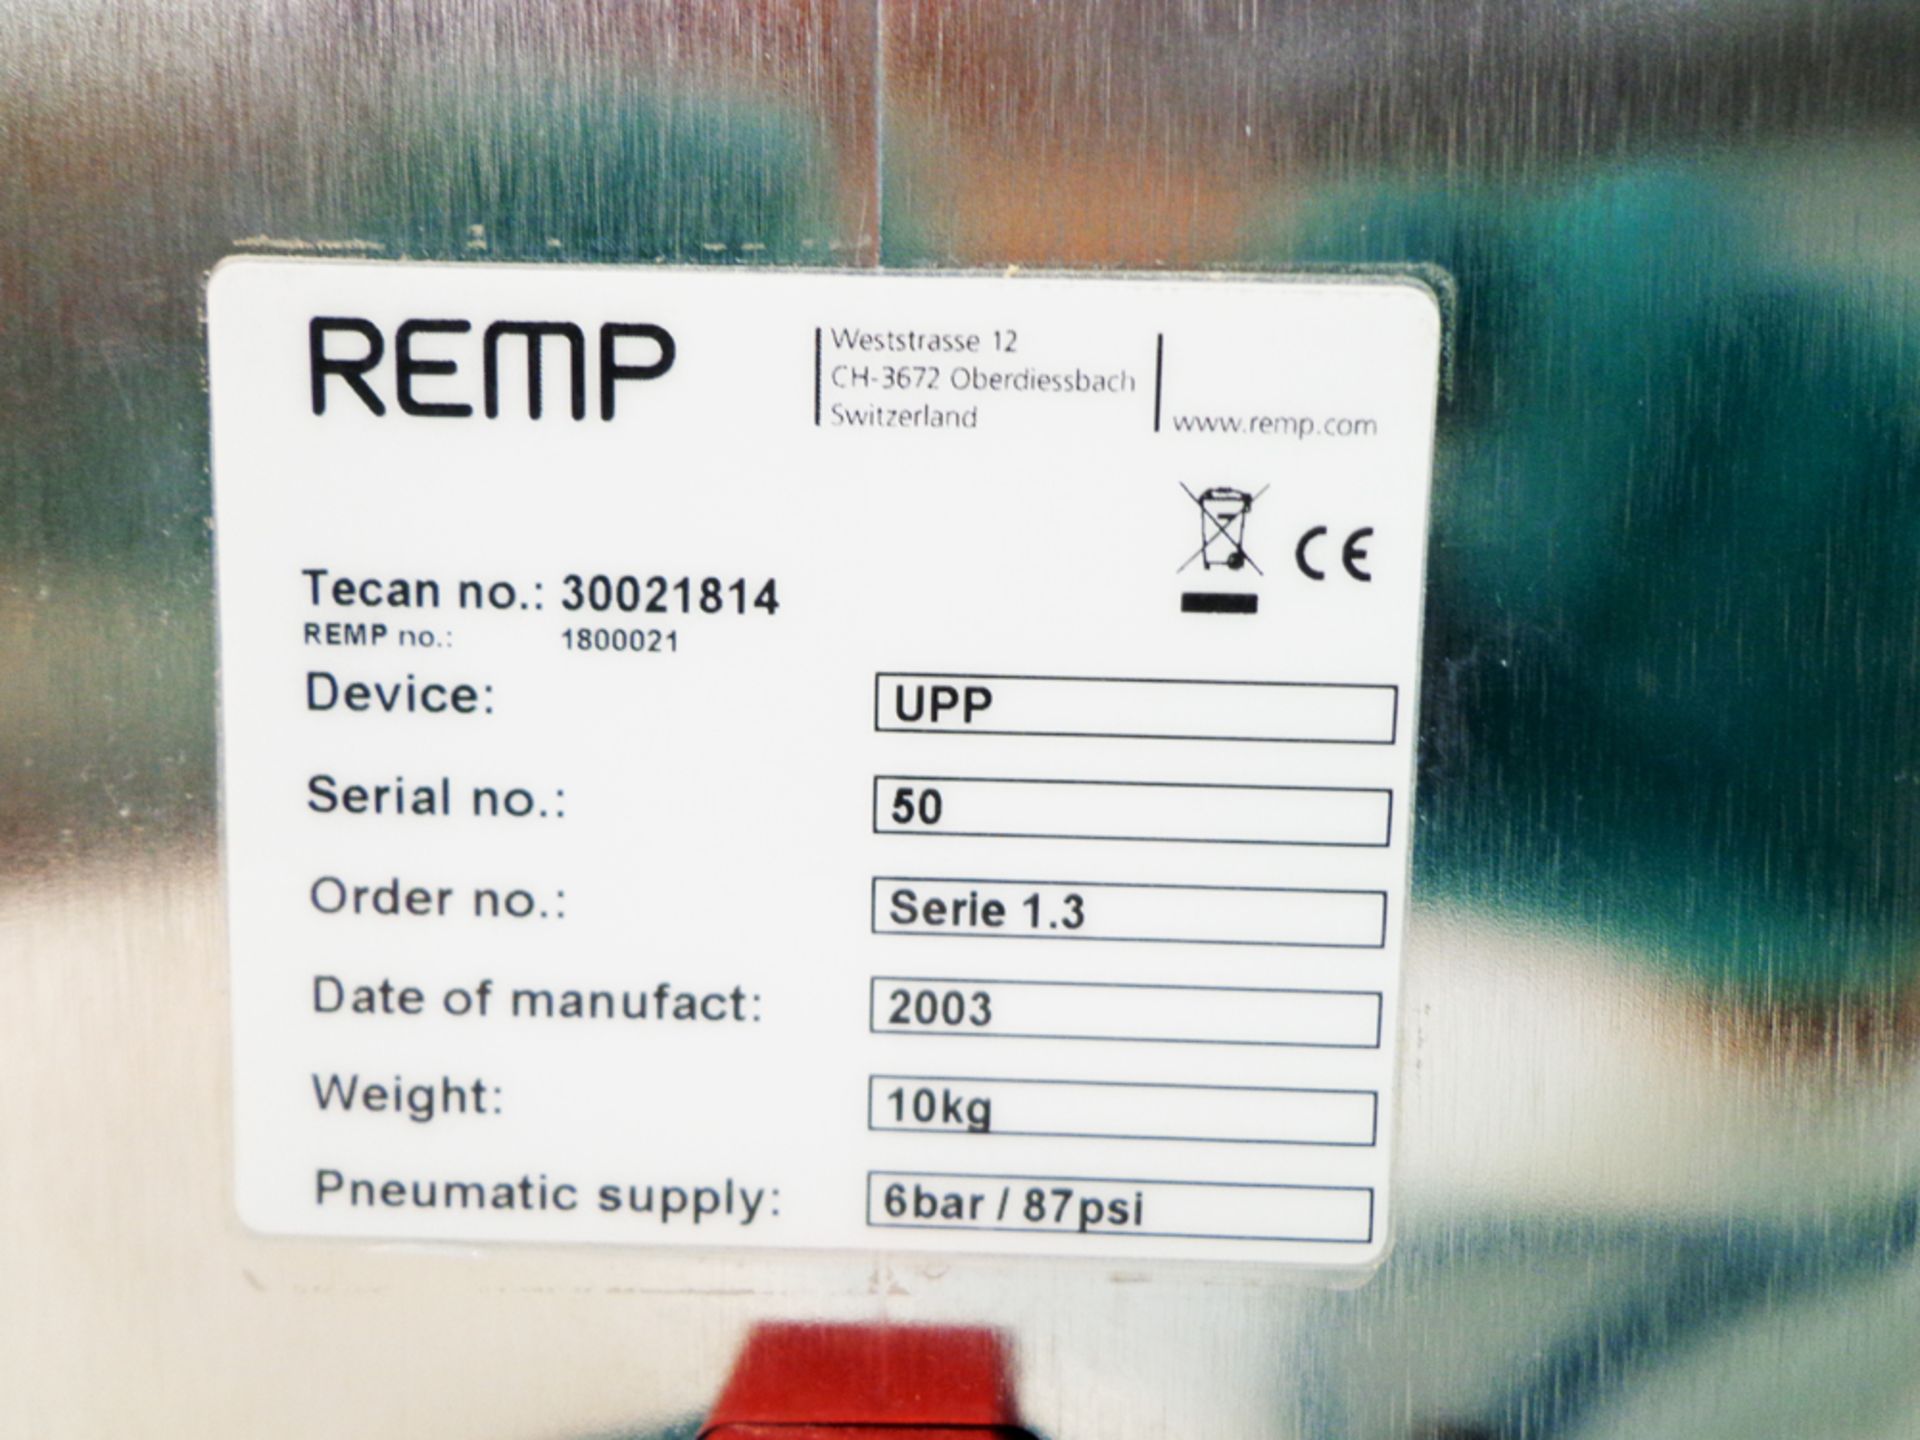 REMP Plate Piercer UPP (Semi-automated operation) with Festo Footvalve Air Pneumatic Footswitch - Image 4 of 7